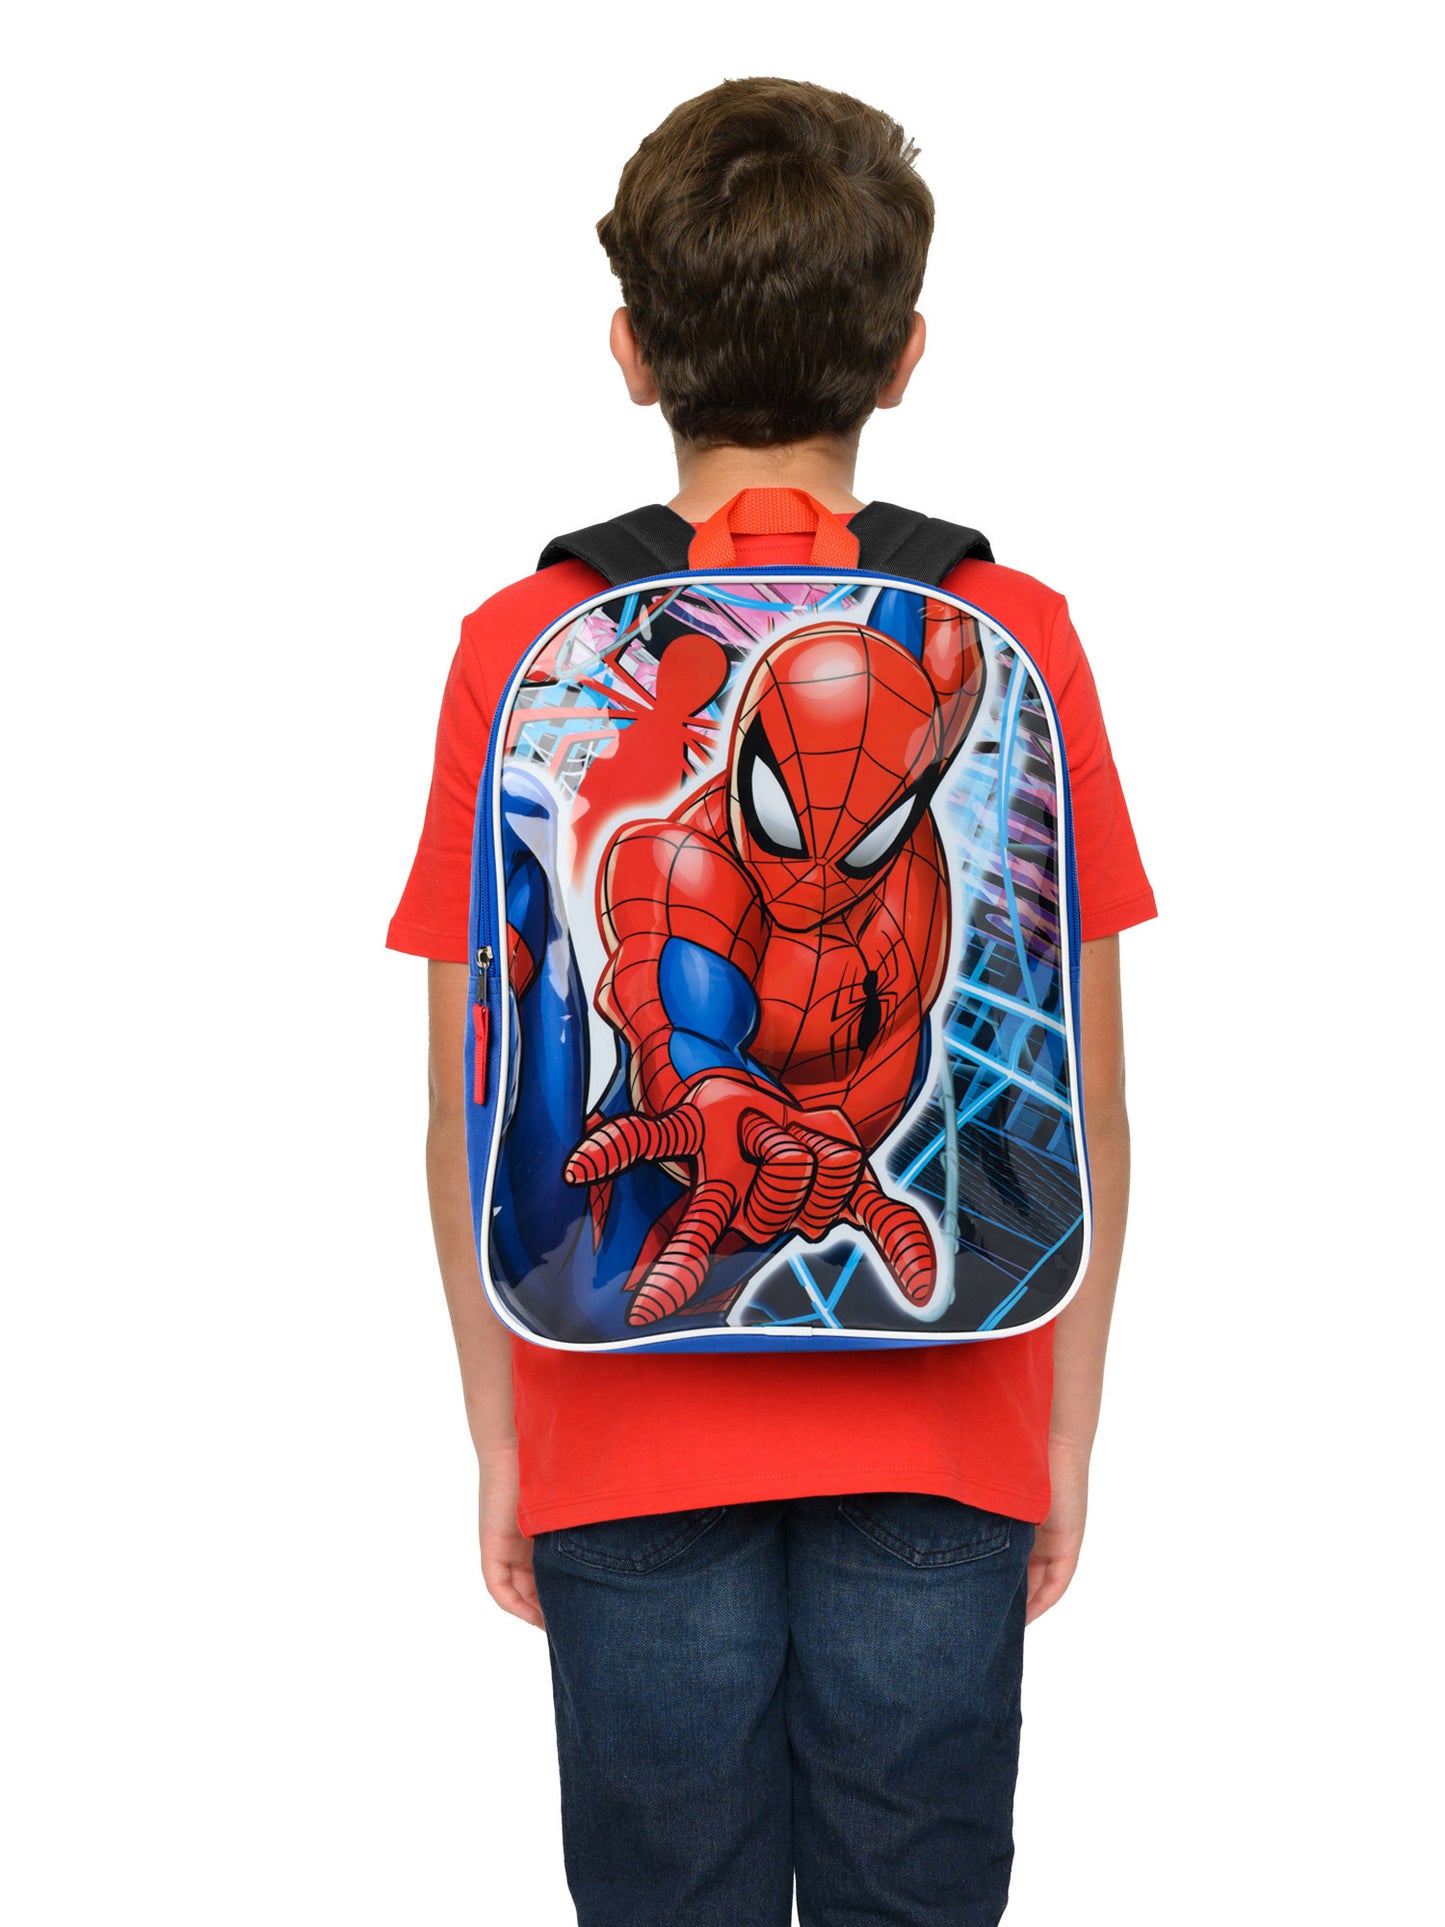 Spider-Man Avengers Backpack 15" w/ Marvel Insulated Lunch Bag Spiderman Set